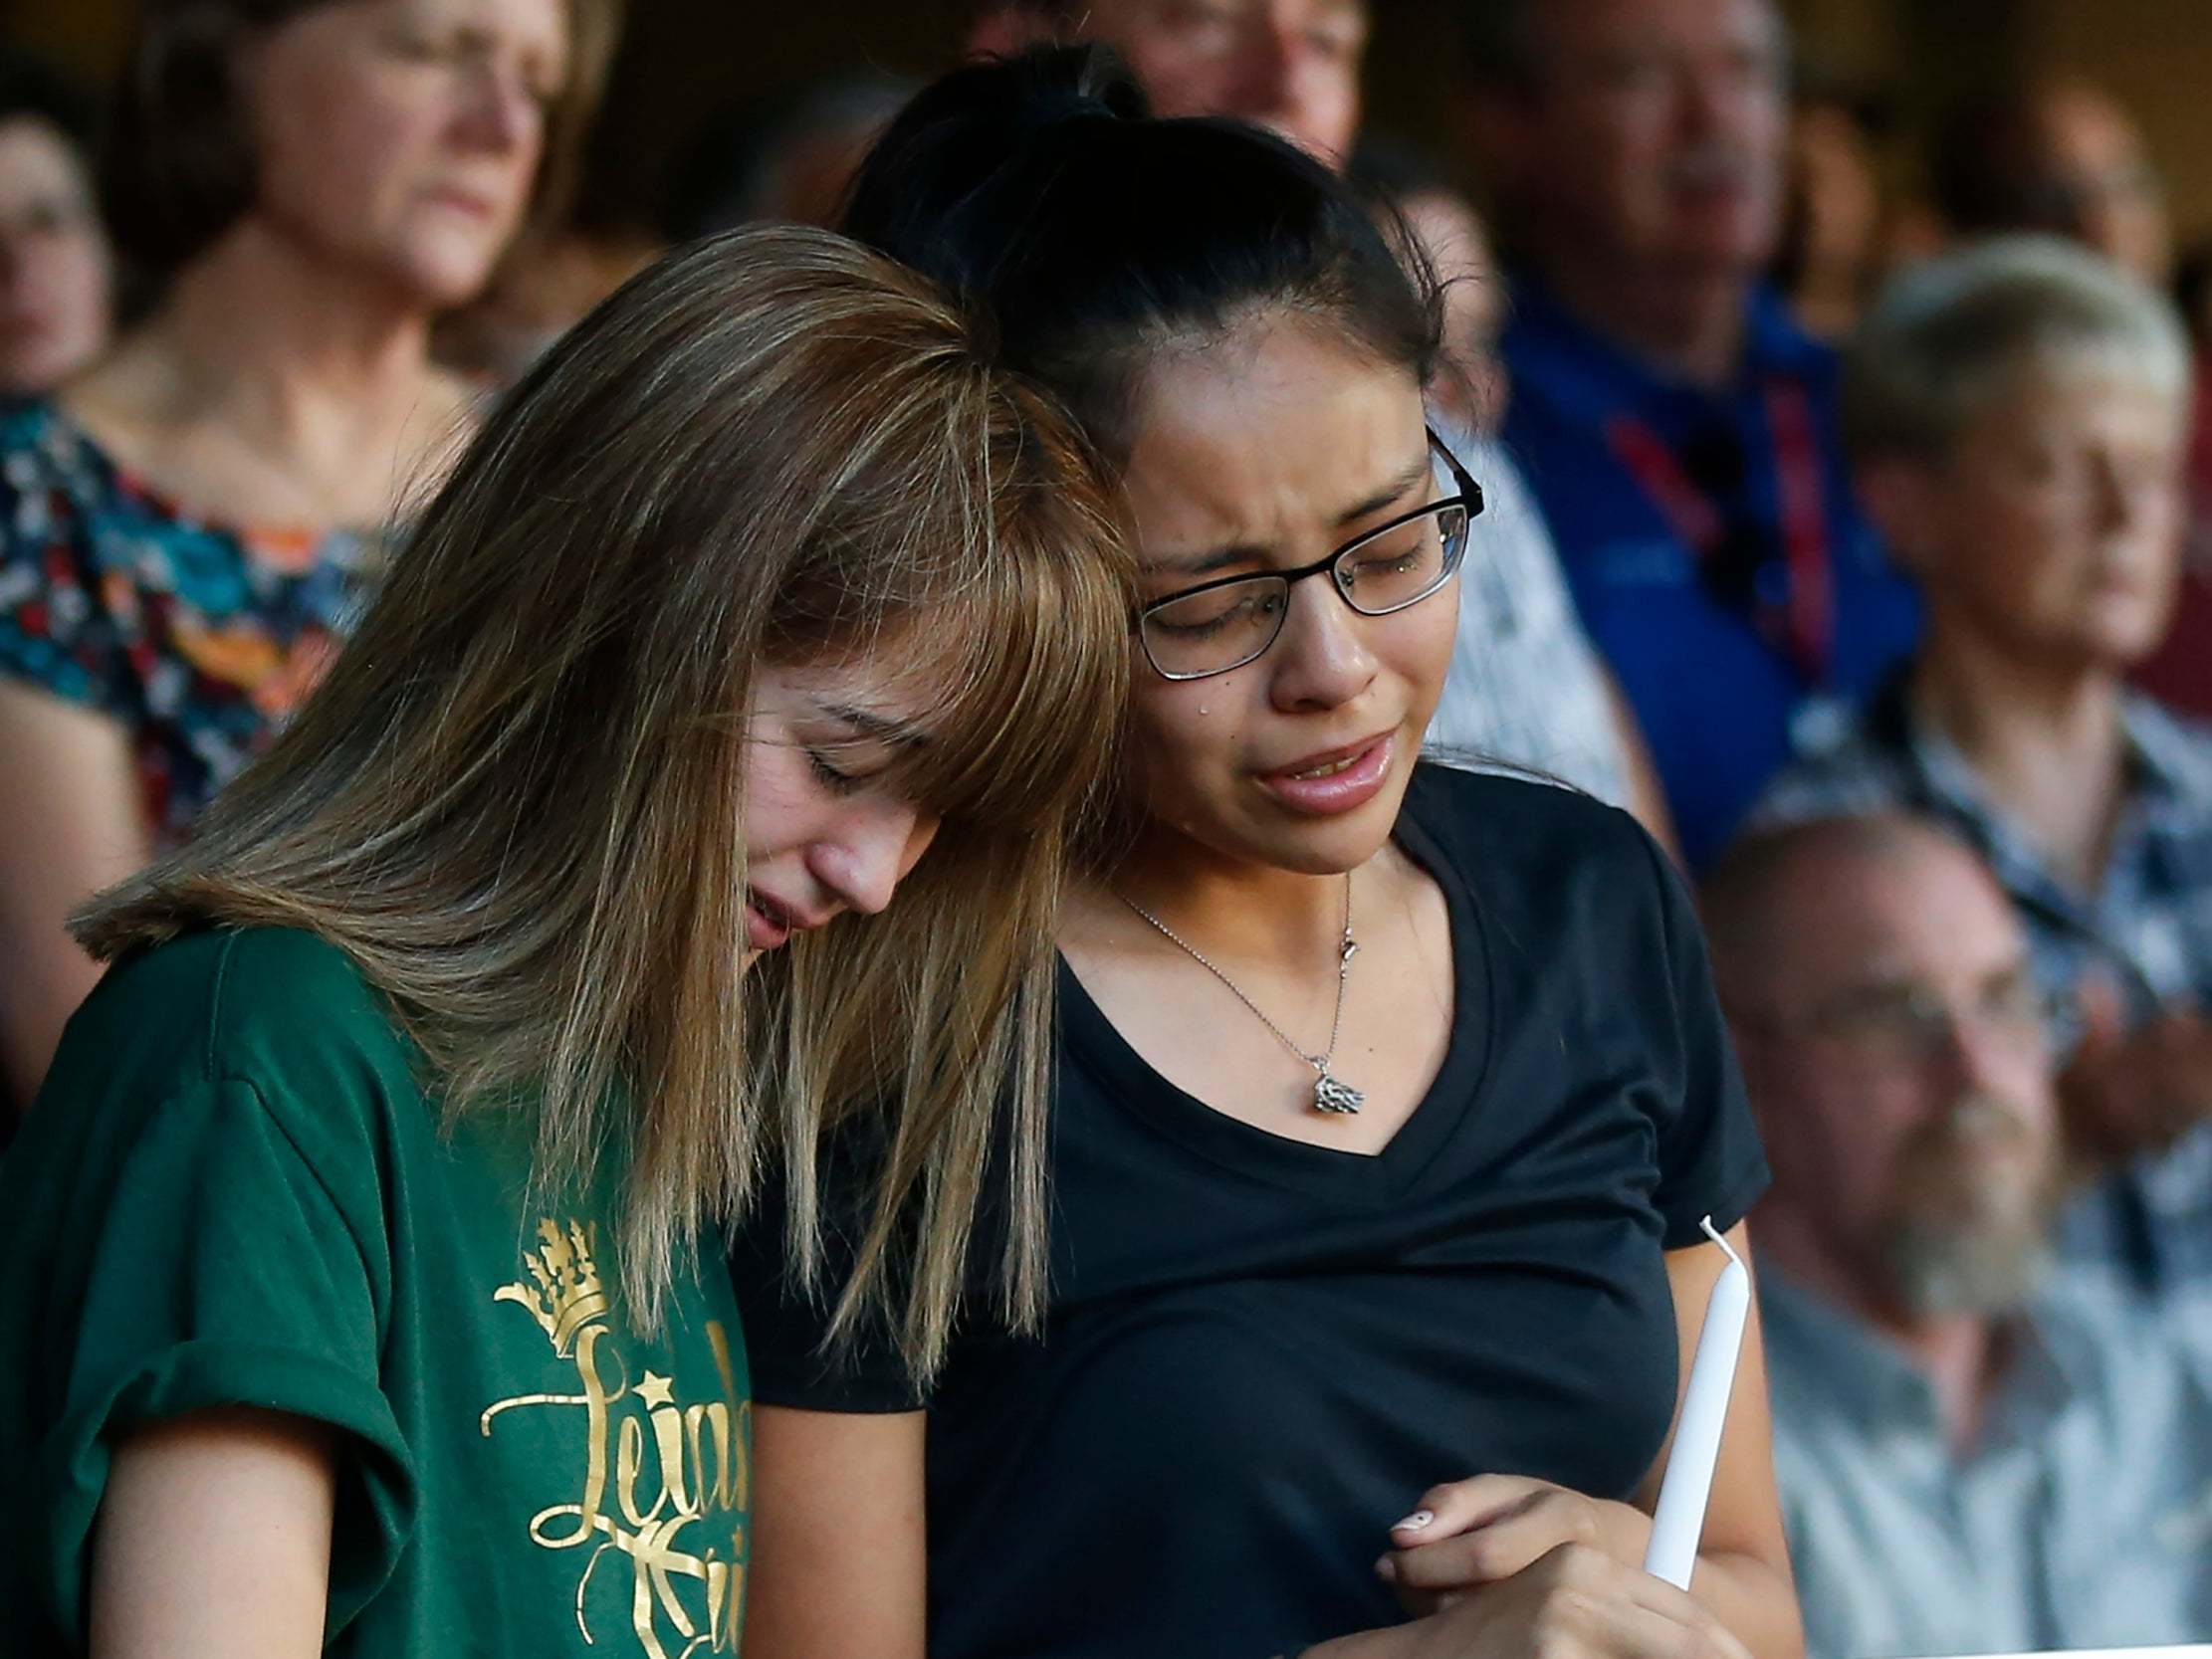 Friends of a high school student among the seven killed in a Texas mass shooting gathered to mourn